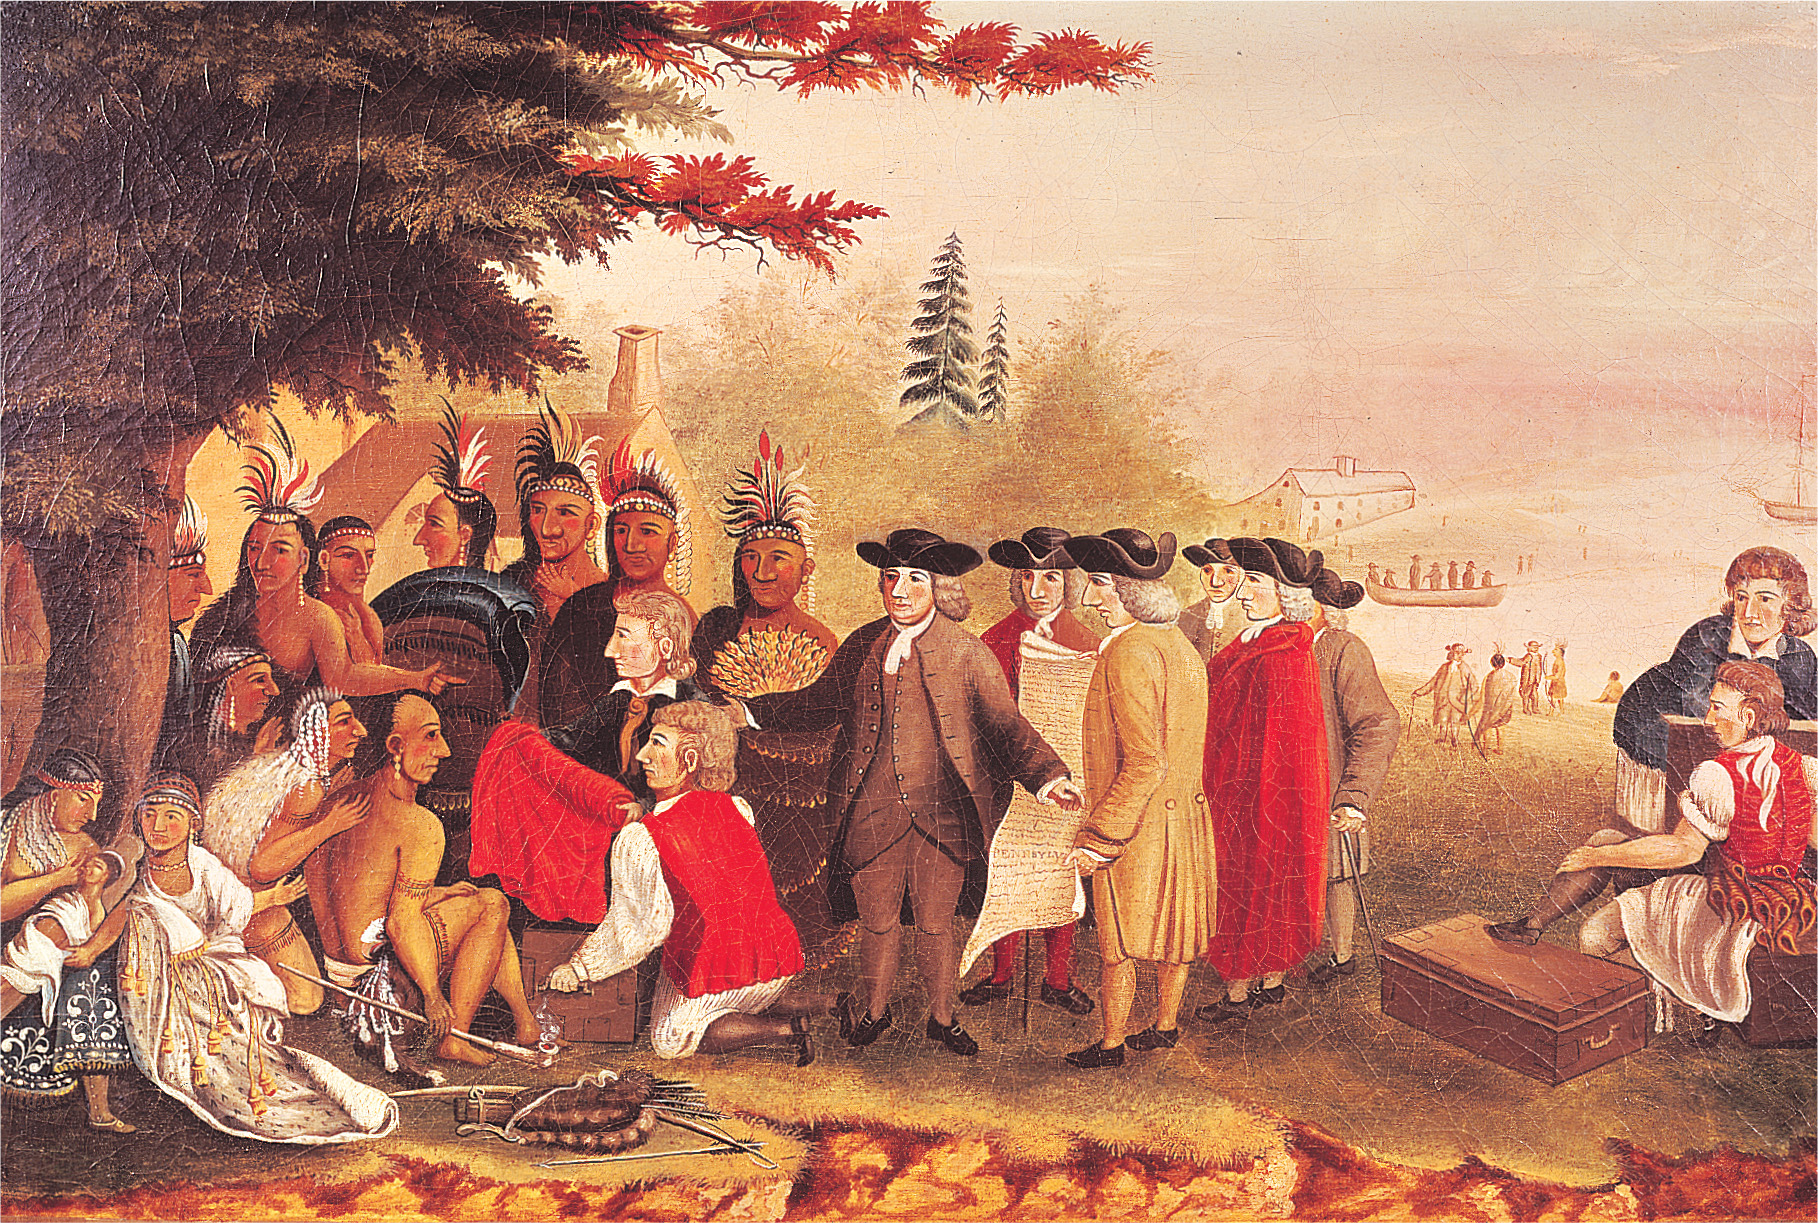 Painting: Penn meets with Native Americans.